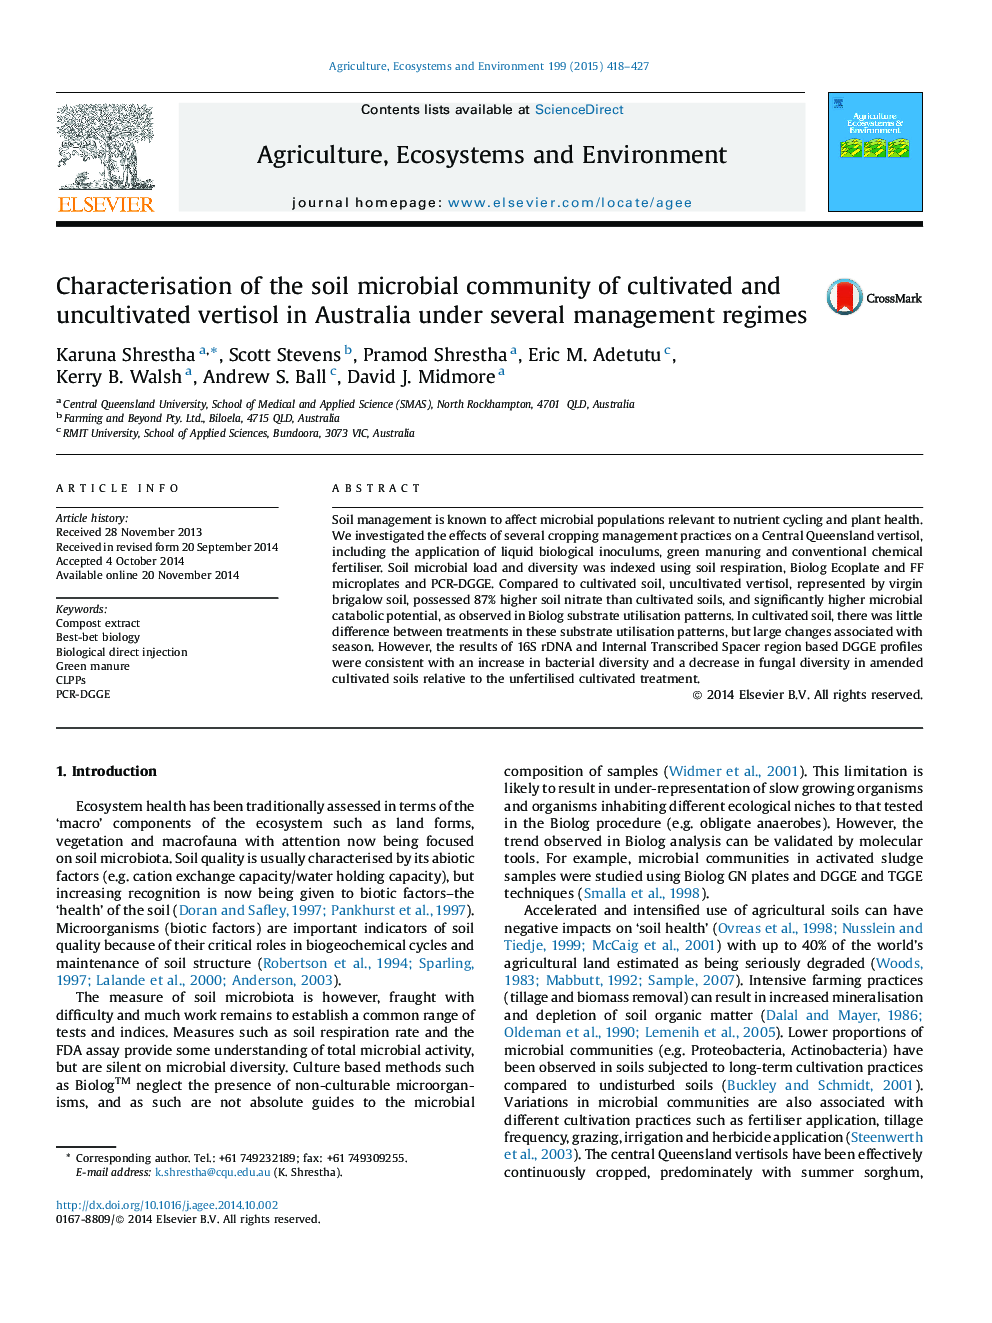 Characterisation of the soil microbial community of cultivated and uncultivated vertisol in Australia under several management regimes